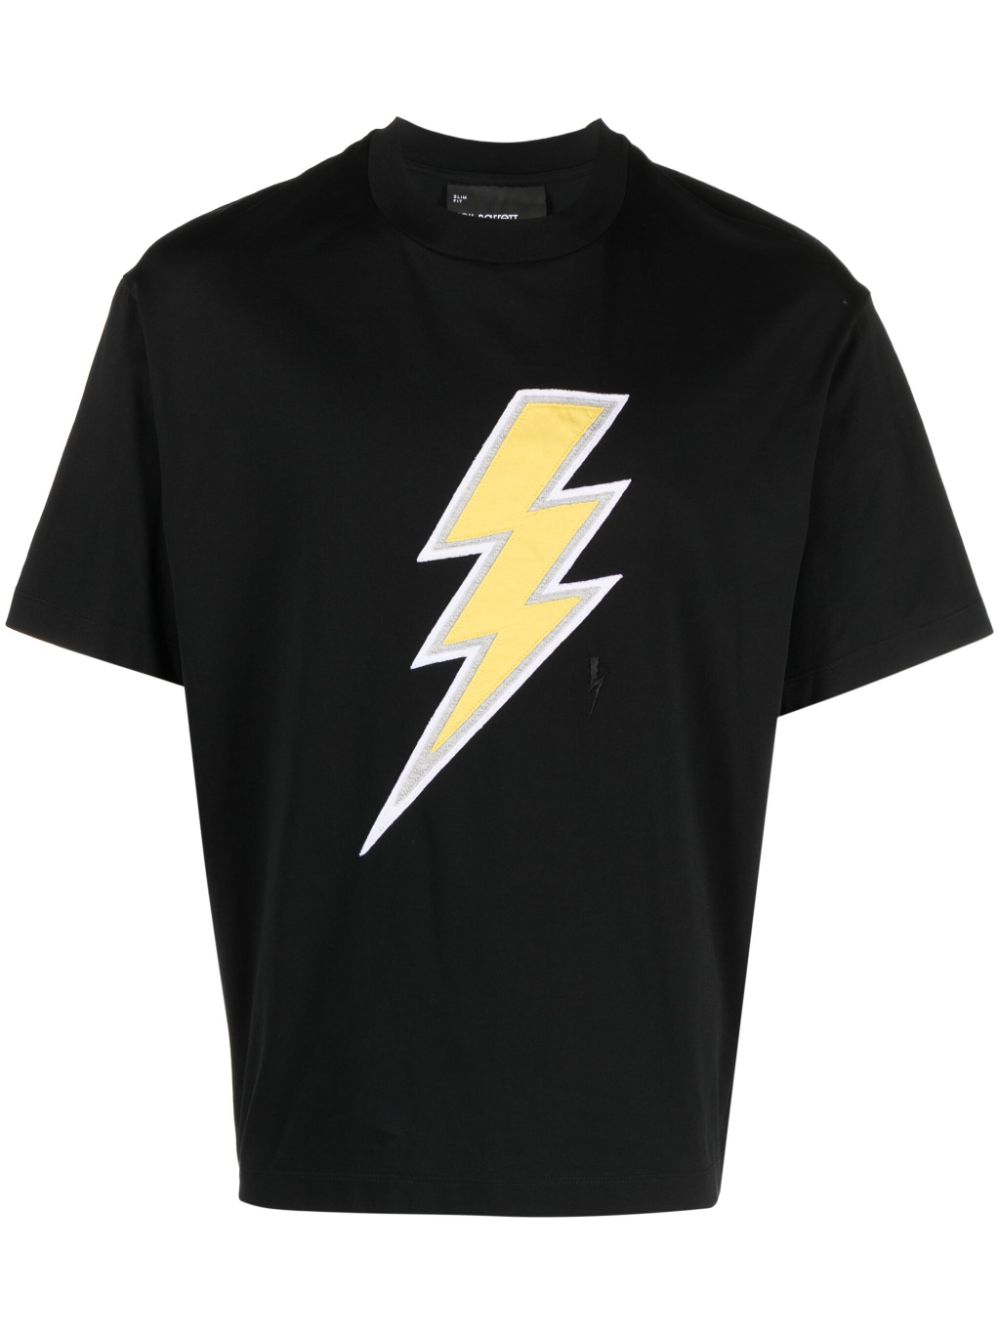 Thunderbolt-embroidered cotton T-shirt